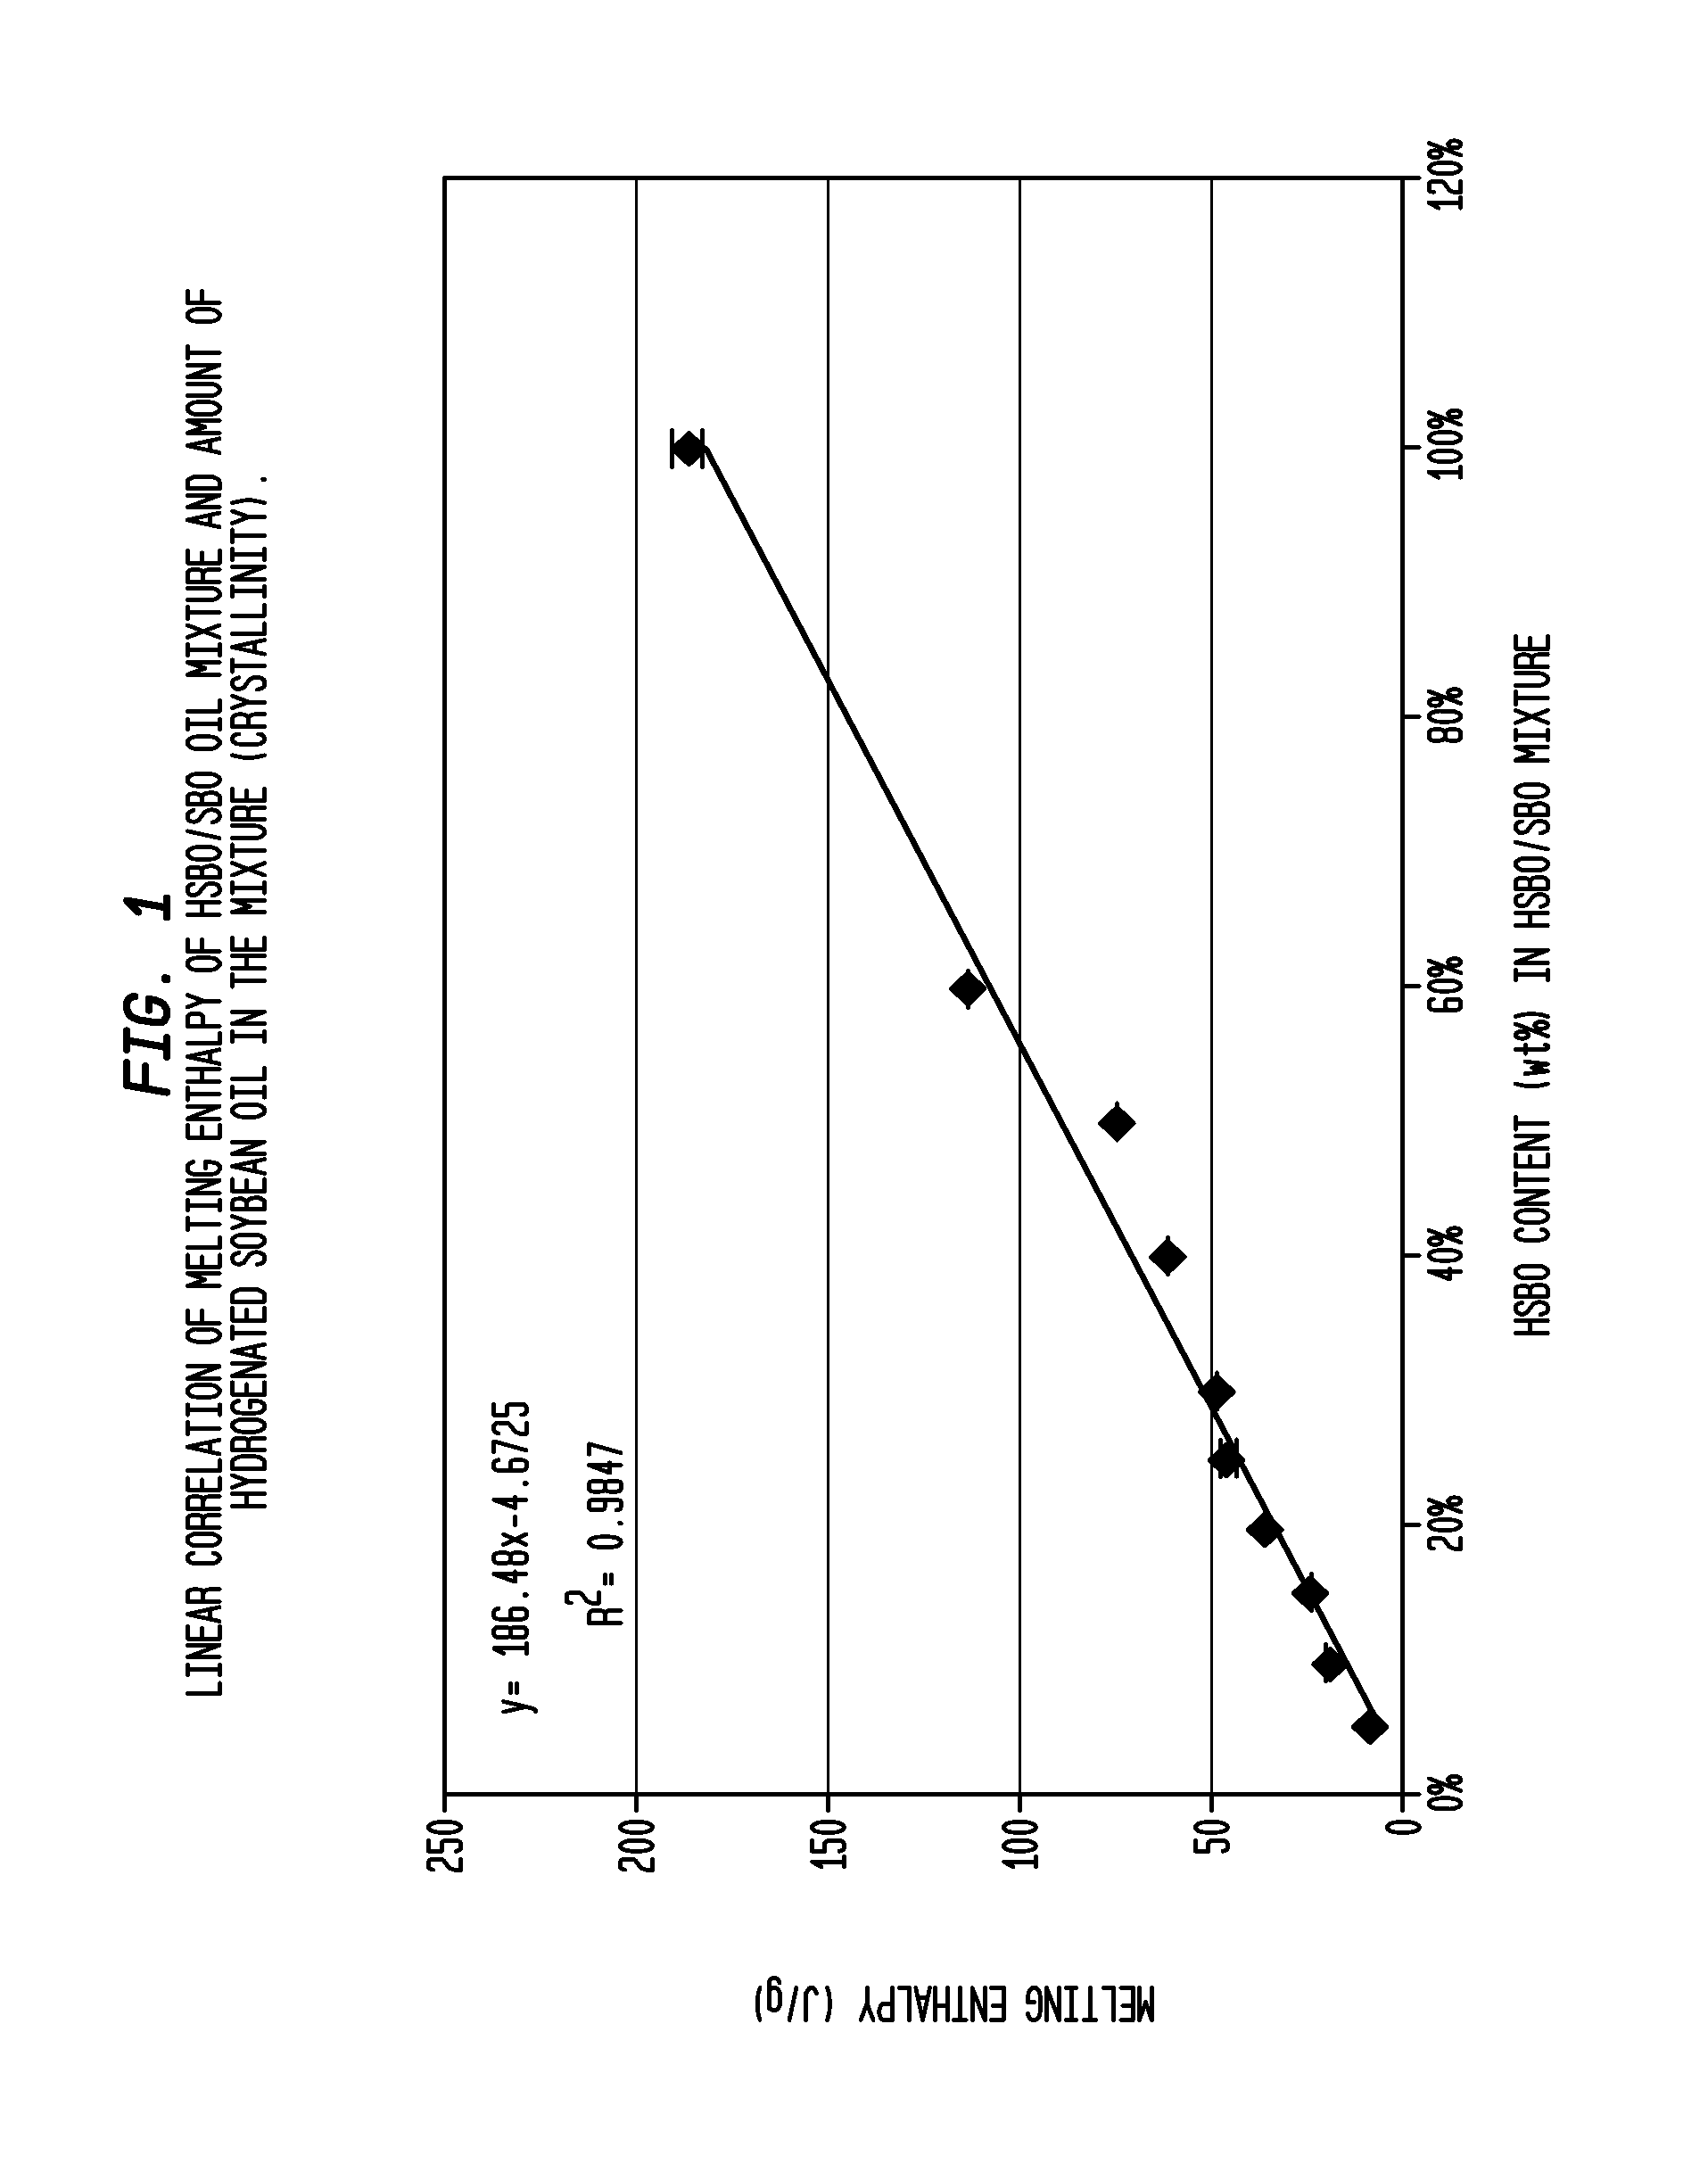 Stable Liquid Cleansing Compositions Comprising Critical Window of Partially Hydrogenated Triglyceride Oil of Defined Iodine Value